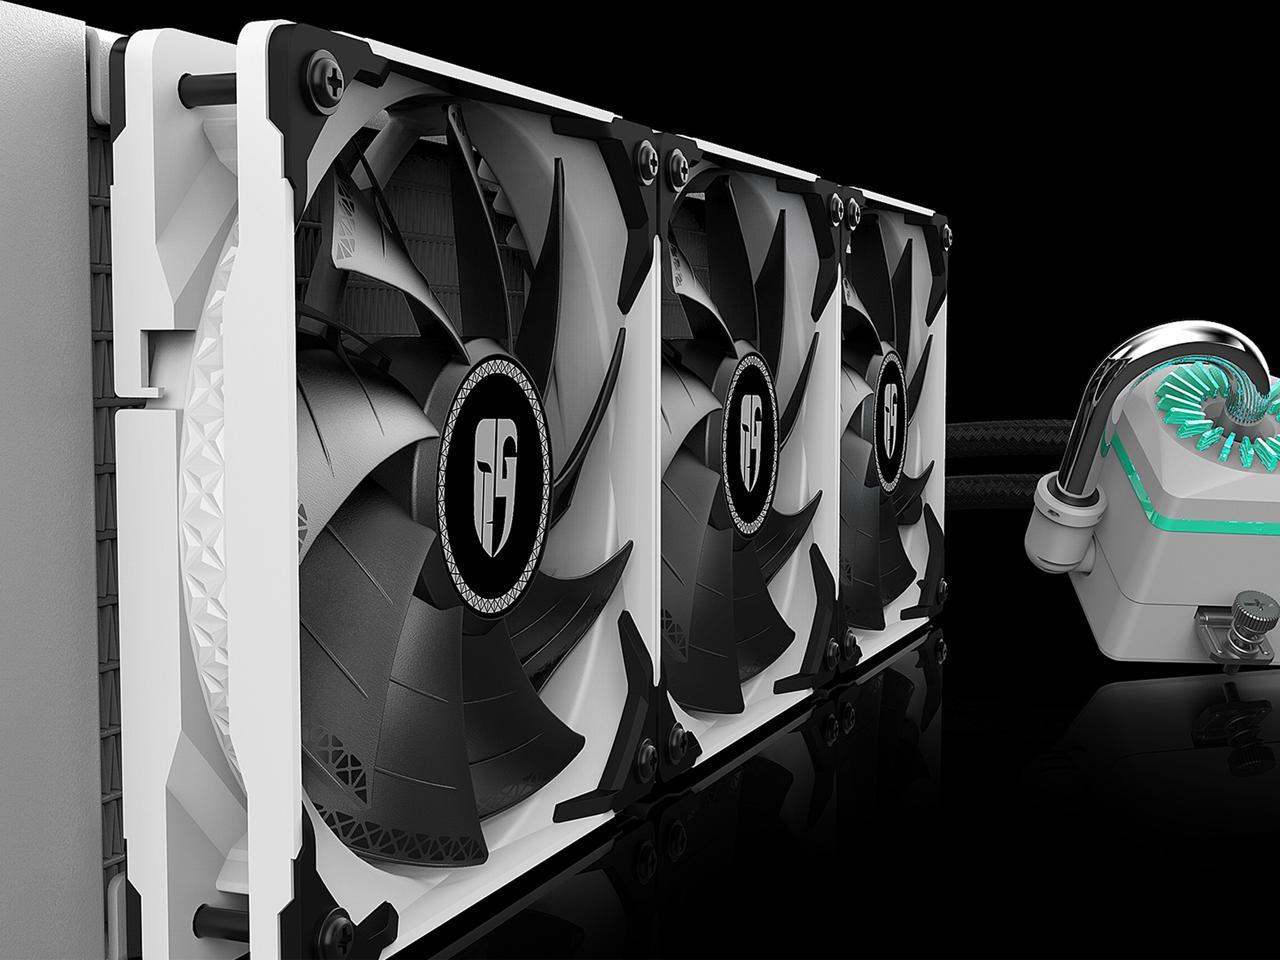 DEEPCOOL Gamer Storm CAPTAIN 360X WHITE, RGB AIO Liquid CPU Cooler, White LED Waterblock, 360mm Radiator, Anti-Leak Technology Inside, 12V RGB 4-Pin Motherboard Control, TR4/AM4 Compatible